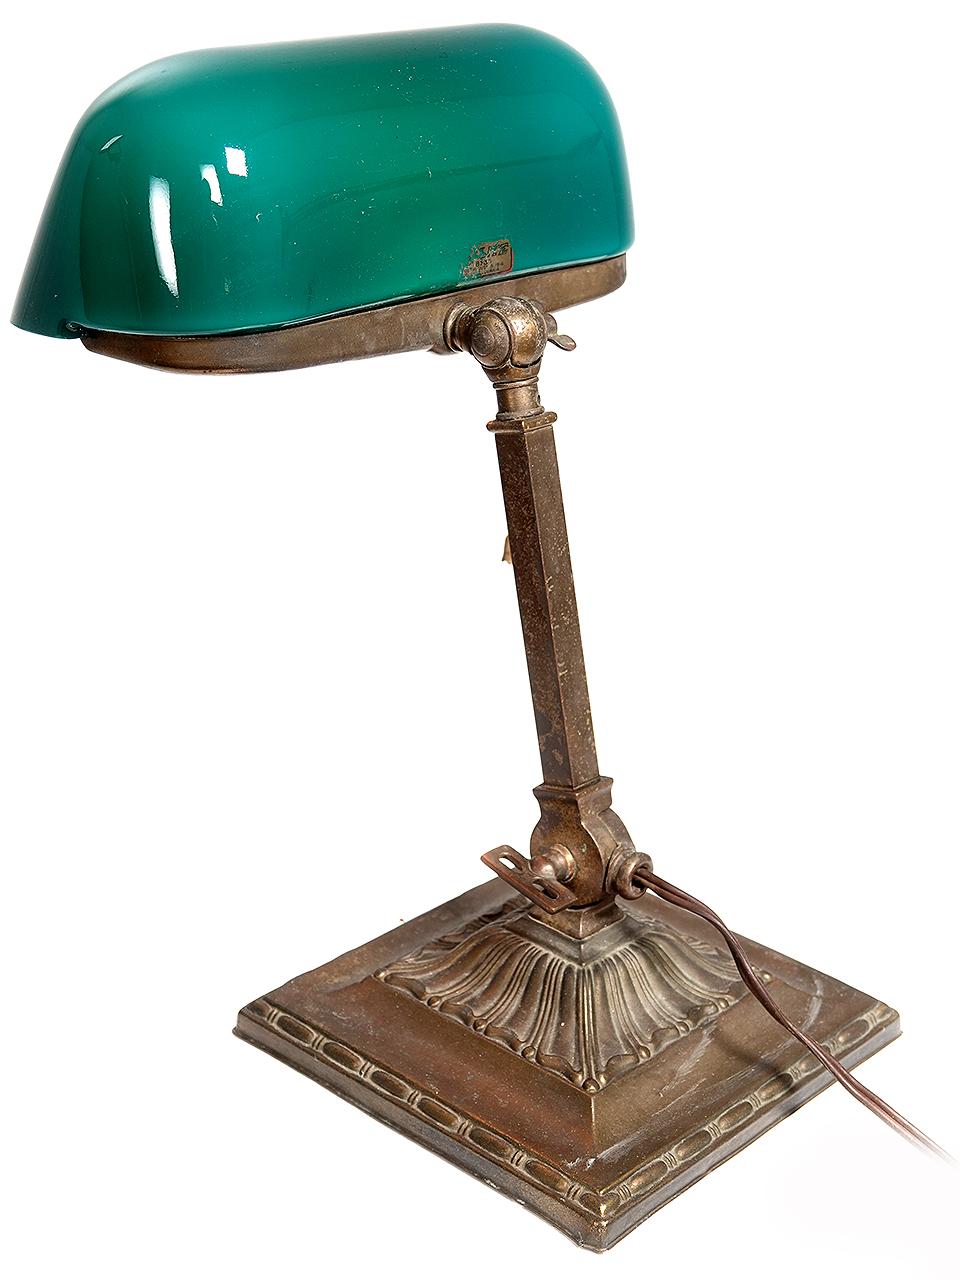 This is an original signed Emeralite table lamp. The glass is perfect and the look is simple and elegant. The base is heavy. Both the arm and shade articulate. This is a beautiful sought after table or piano lamp.